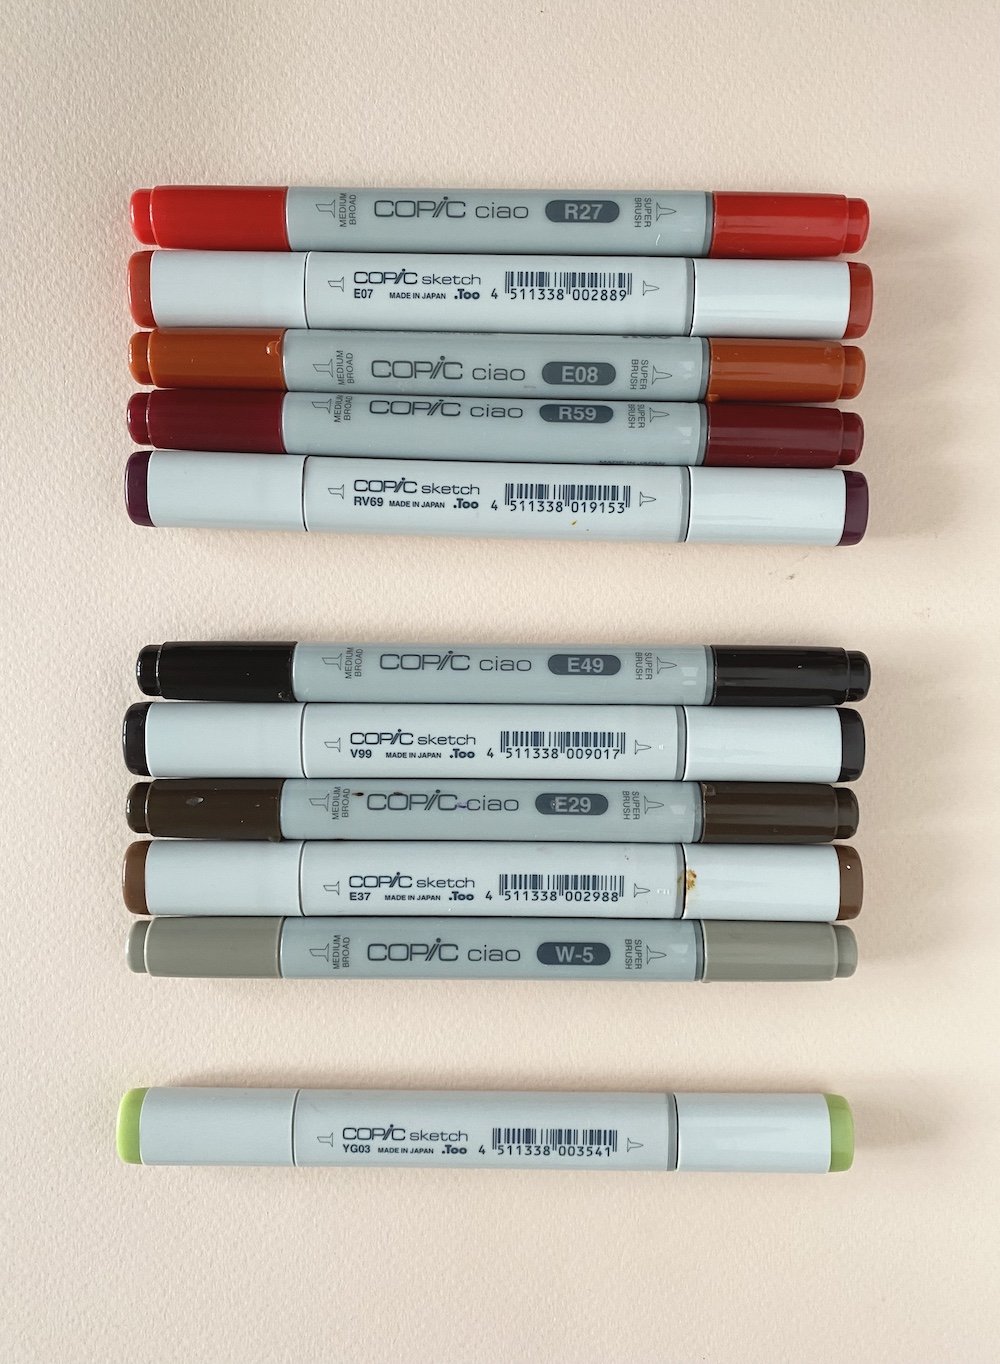 Copic Various Ink! How to Refill your Markers, Make a Mess & Clean it up! 